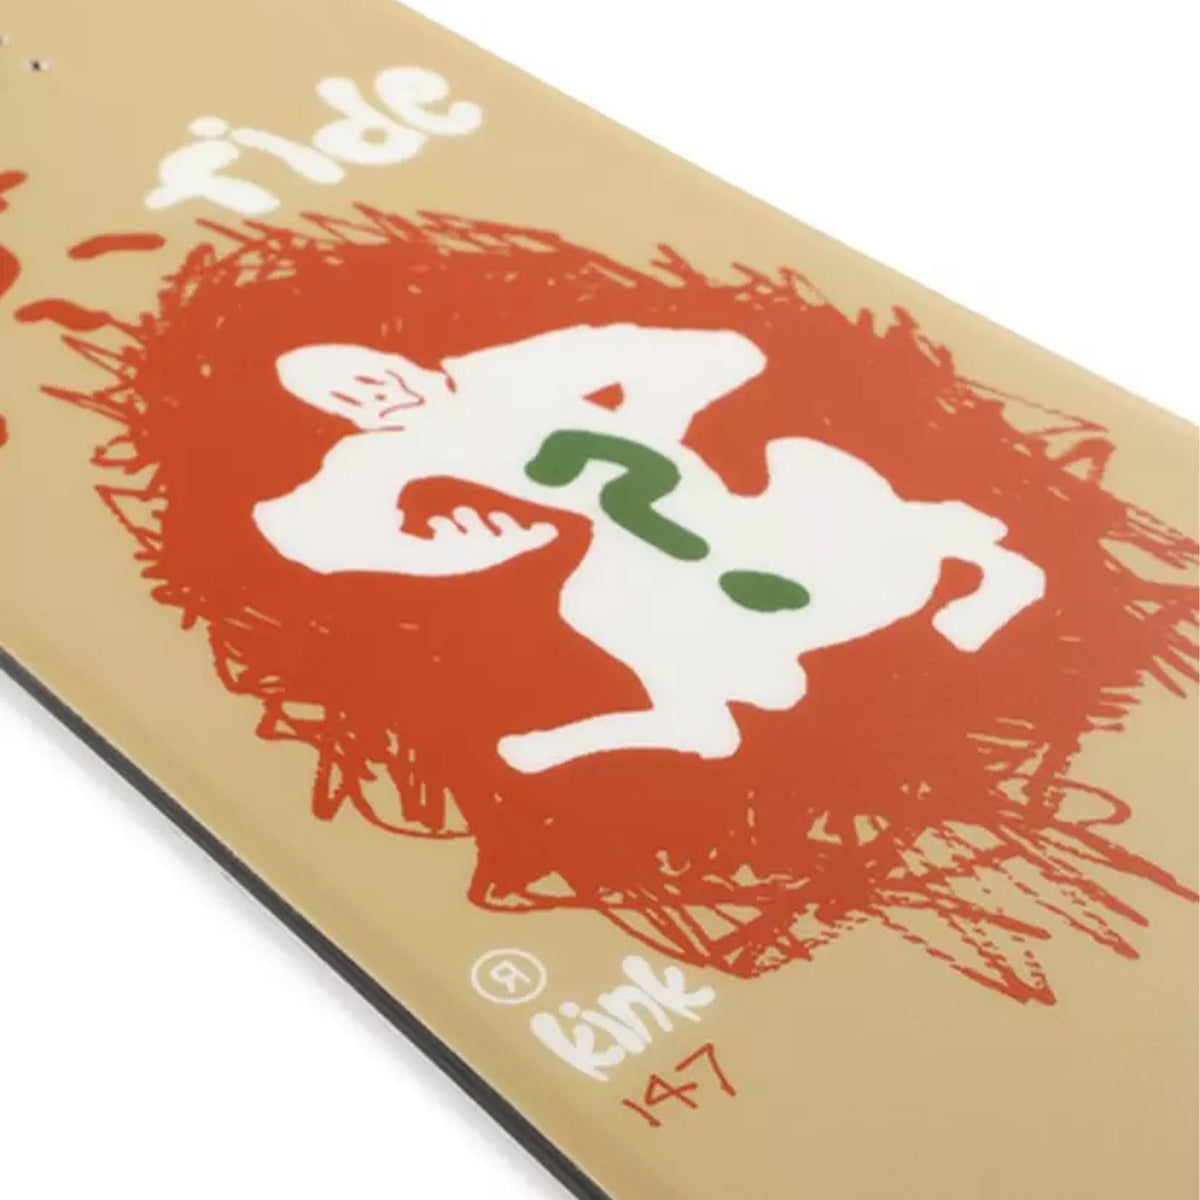 Image features the deck of the Ride Kink snowboard with the size and logo.